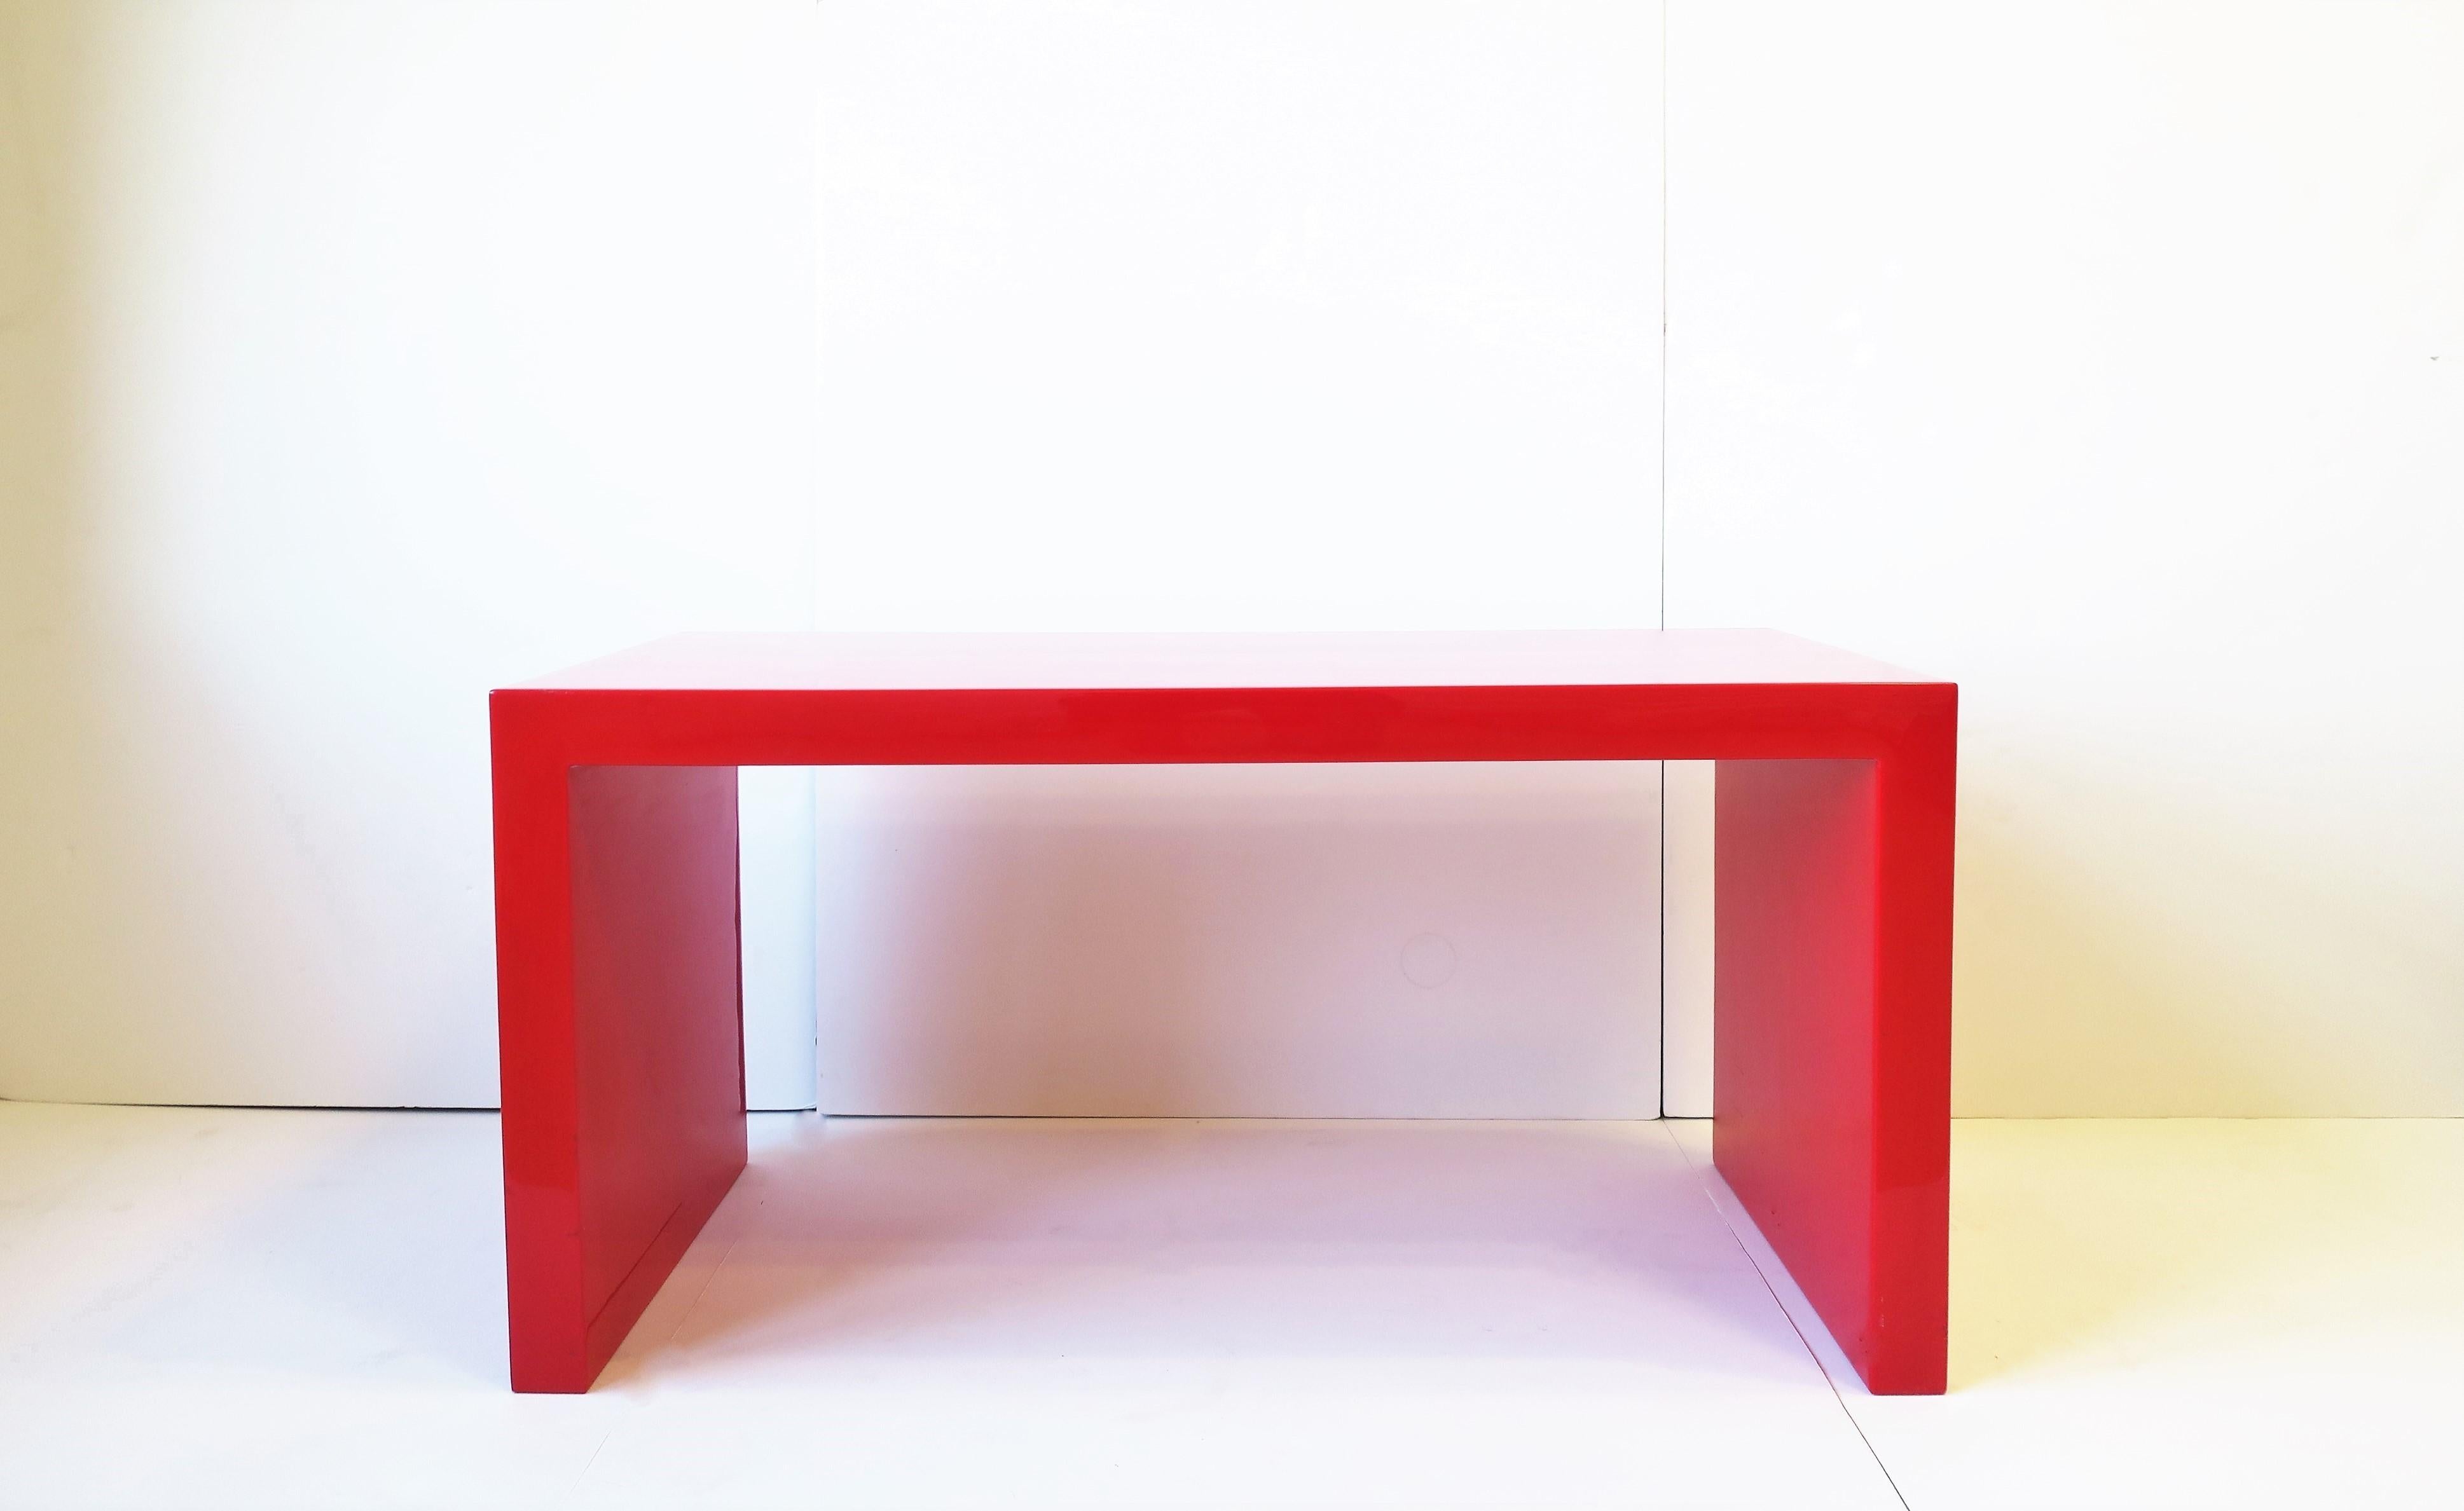 A beautiful and substantial high-gloss red opaque acrylic bench or cocktail table, circa late 20th to early 21st century. Great as a bench or coffee/cocktail table. Dimensions: 18